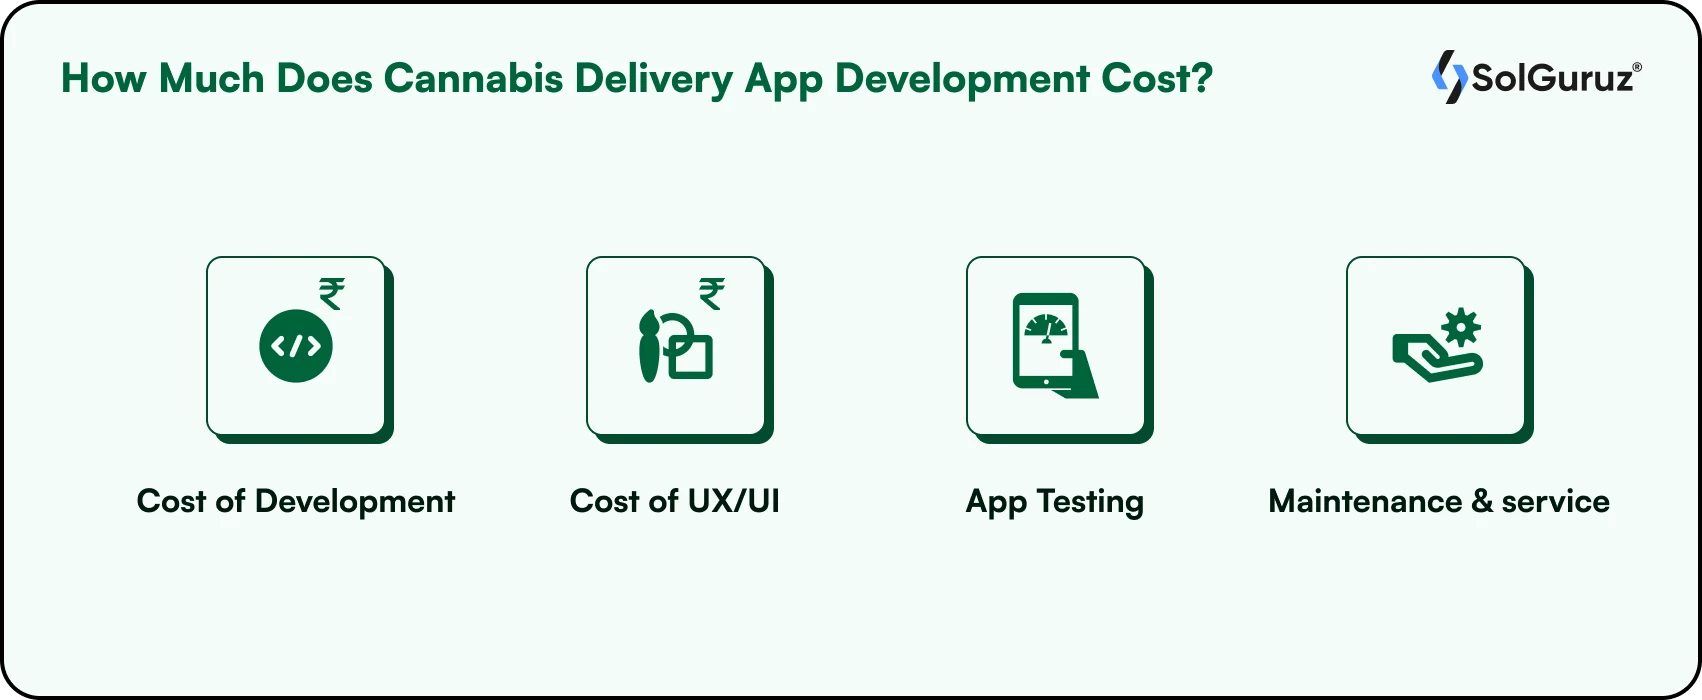 How Much Does Cannabis Delivery App Development Cost